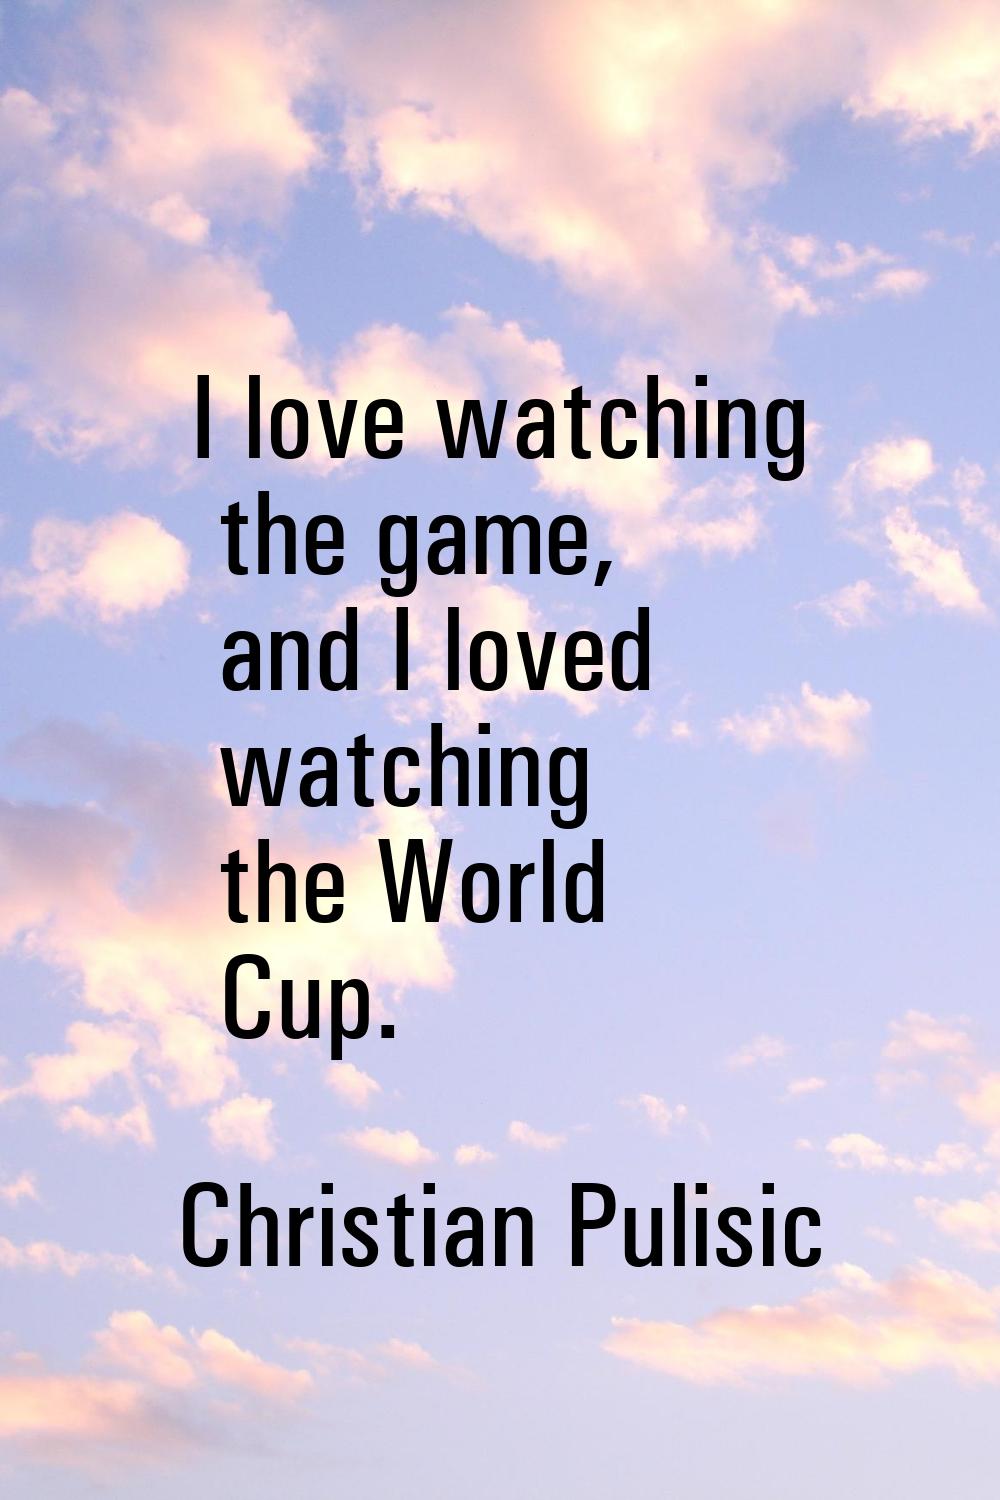 I love watching the game, and I loved watching the World Cup.